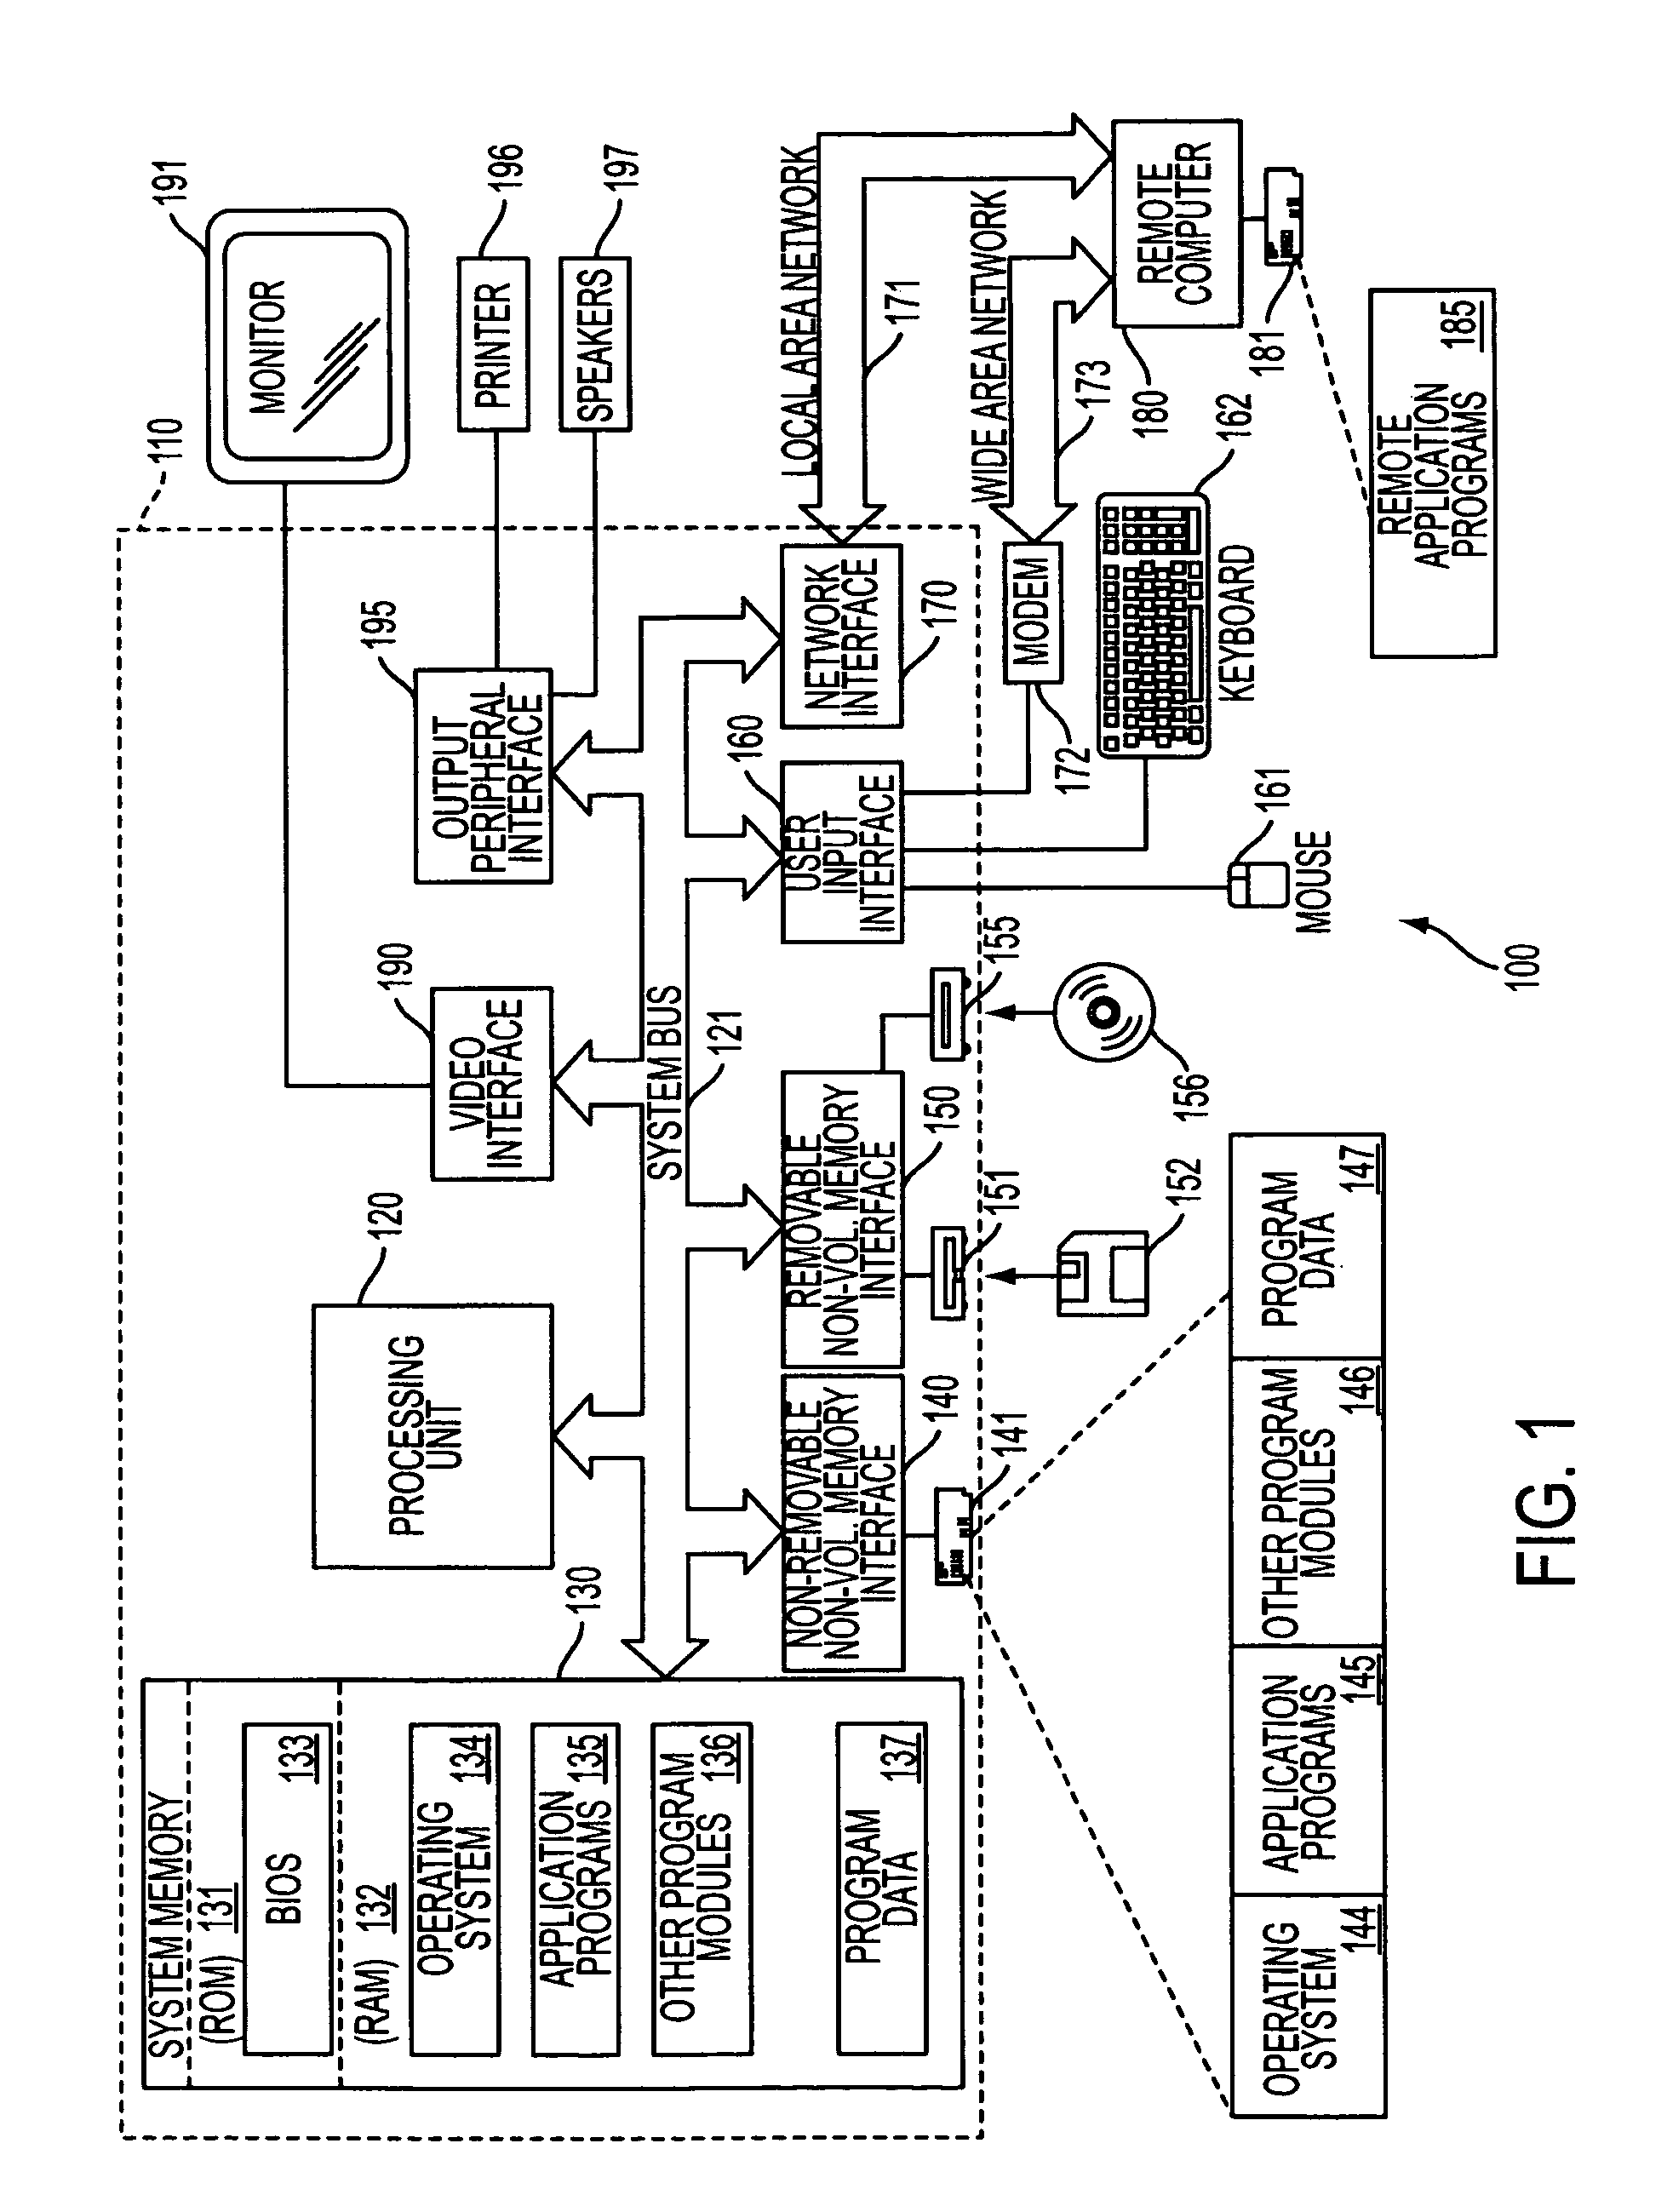 Graphical user interface for 3-dimensional view of a data collection based on an attribute of the data